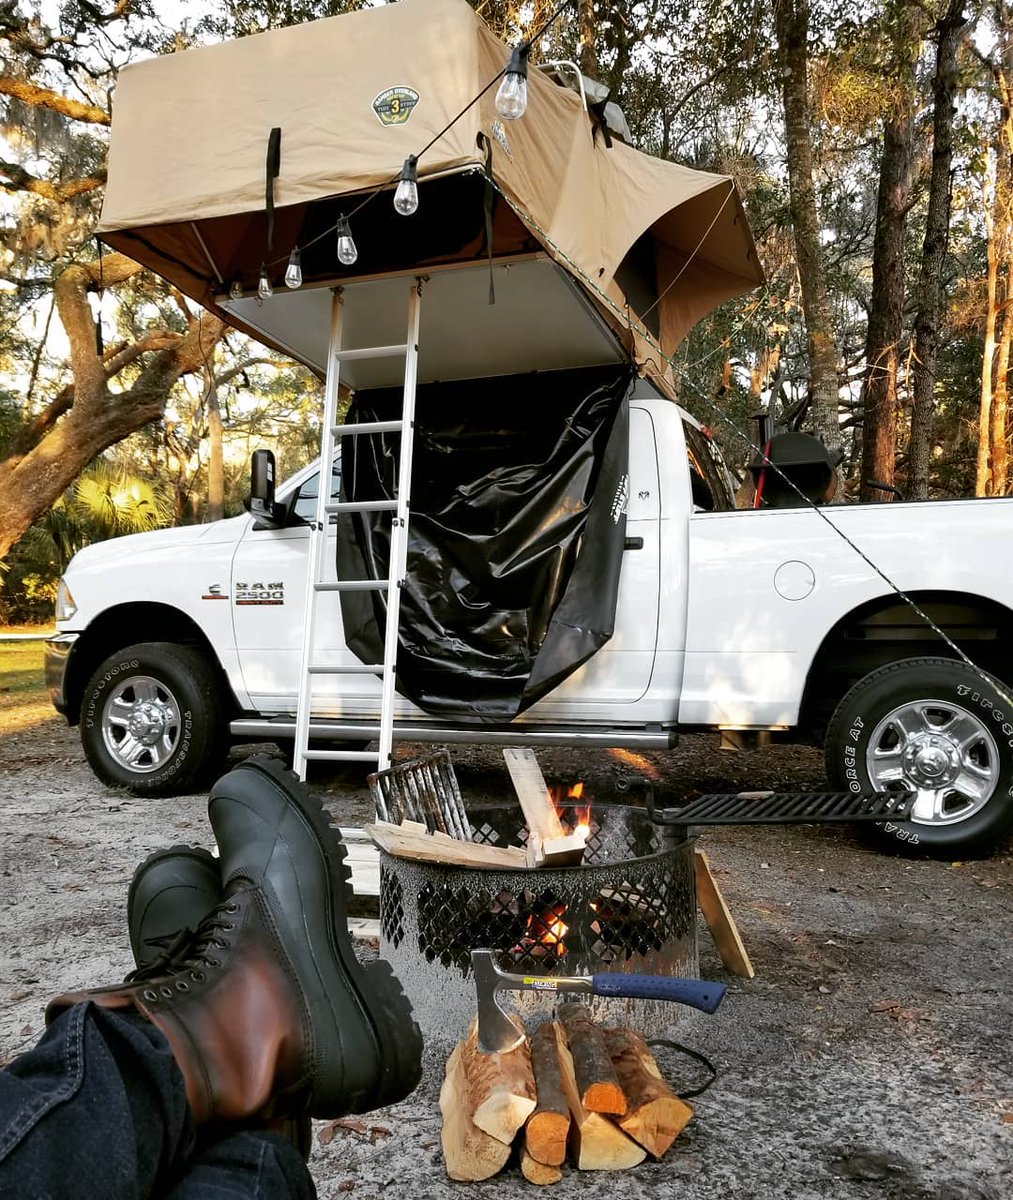 #repost @tastycamper
Jobs fill your pockets, adventures fill your soul
#campfire #campground #tuffstuff4x4 #overlanding #camping #fryeboots #estwing